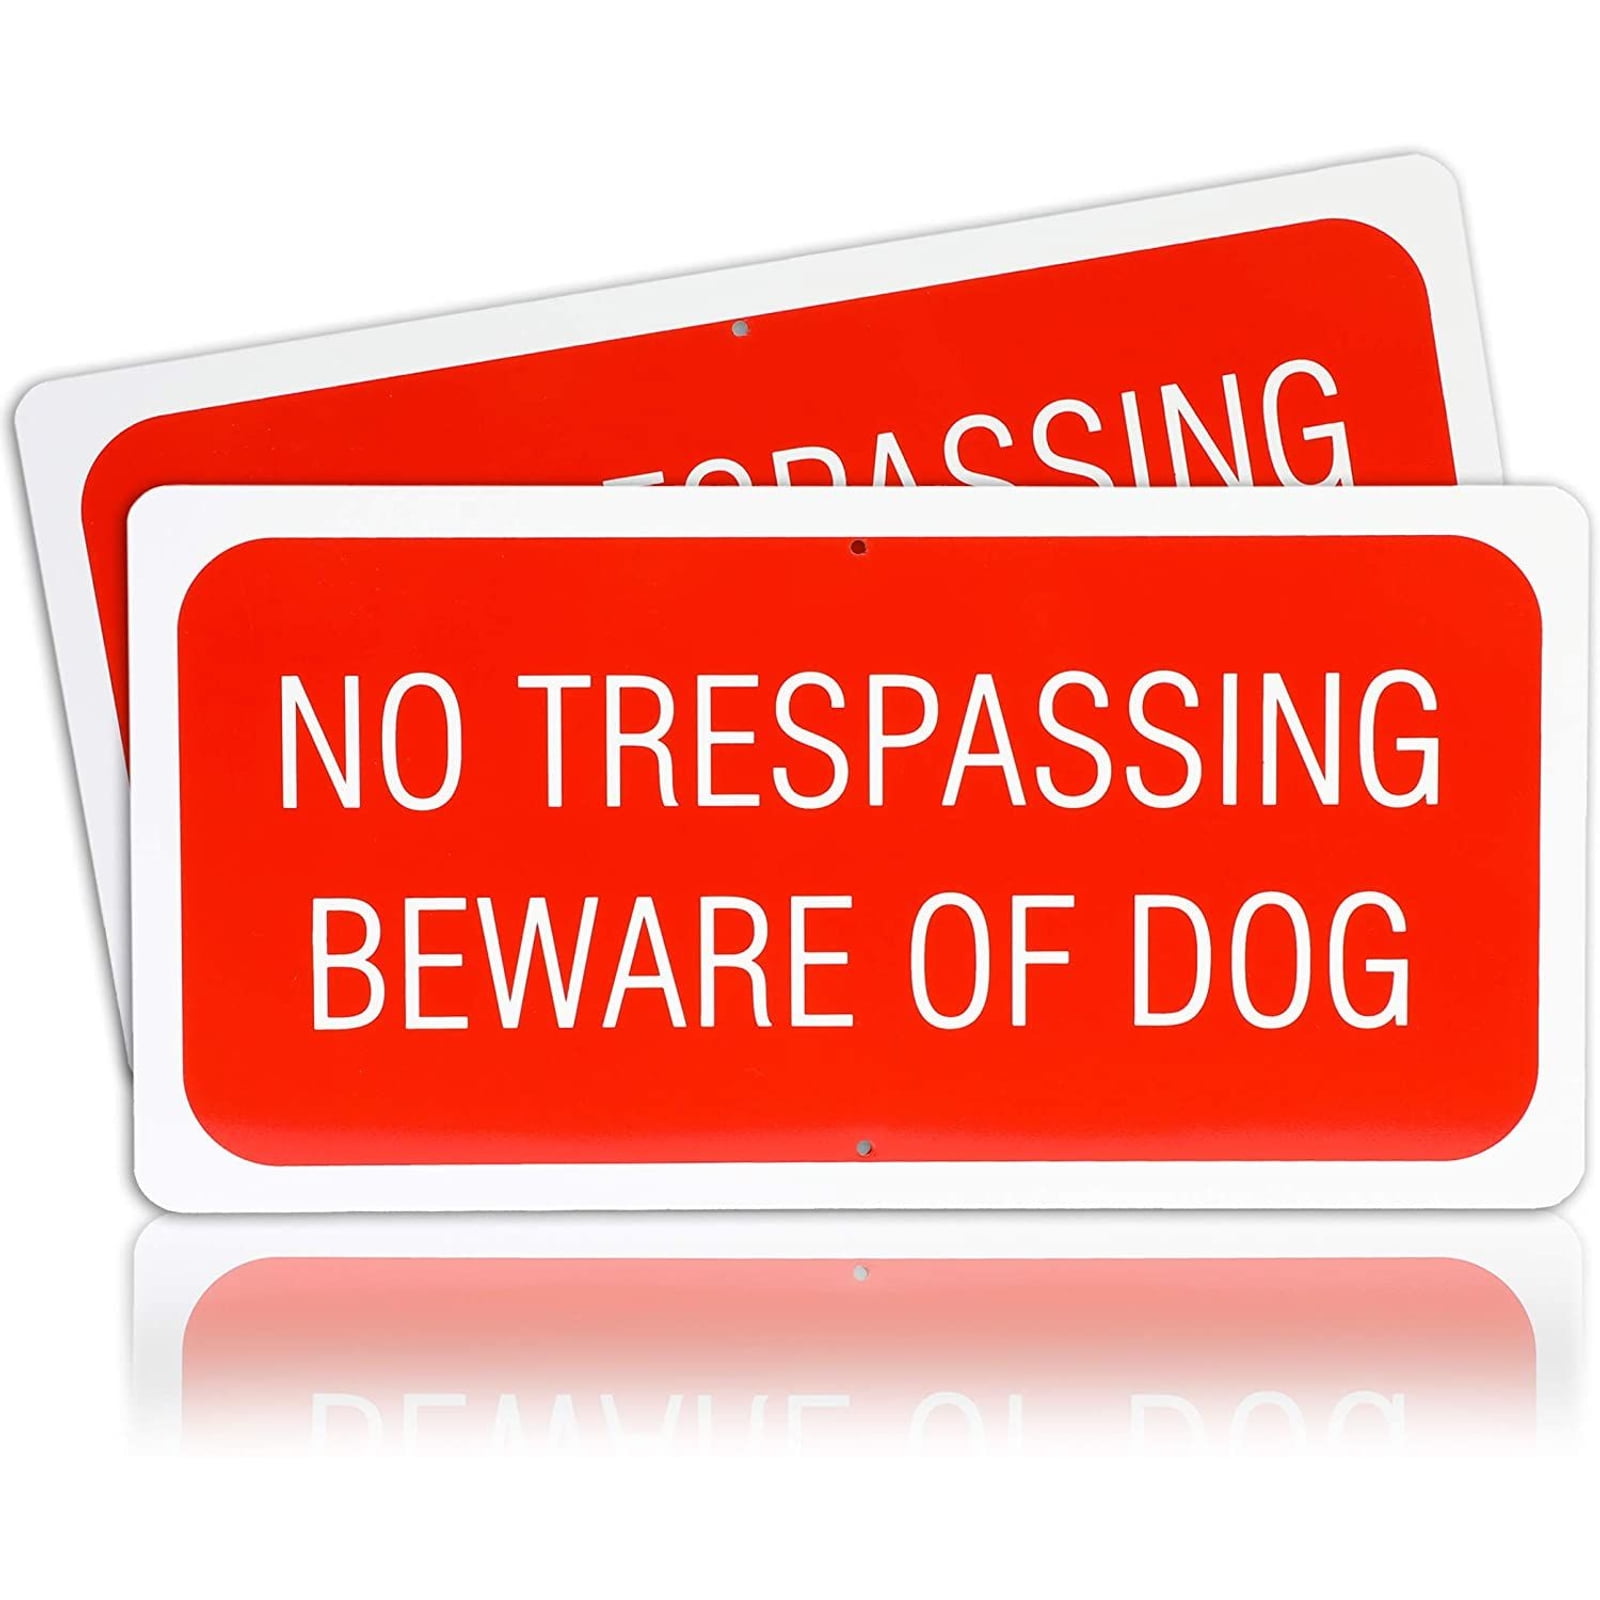 Dog Will Bite Sign 14 x 10 Inches Warning Dog Sign Metal Reflective Rust Aluminum Weatherproof Fade Resistant UV Protected Durable Ink Easy Mounting Indoor Outdoor Use 2 Pack Beware of Dog Sign